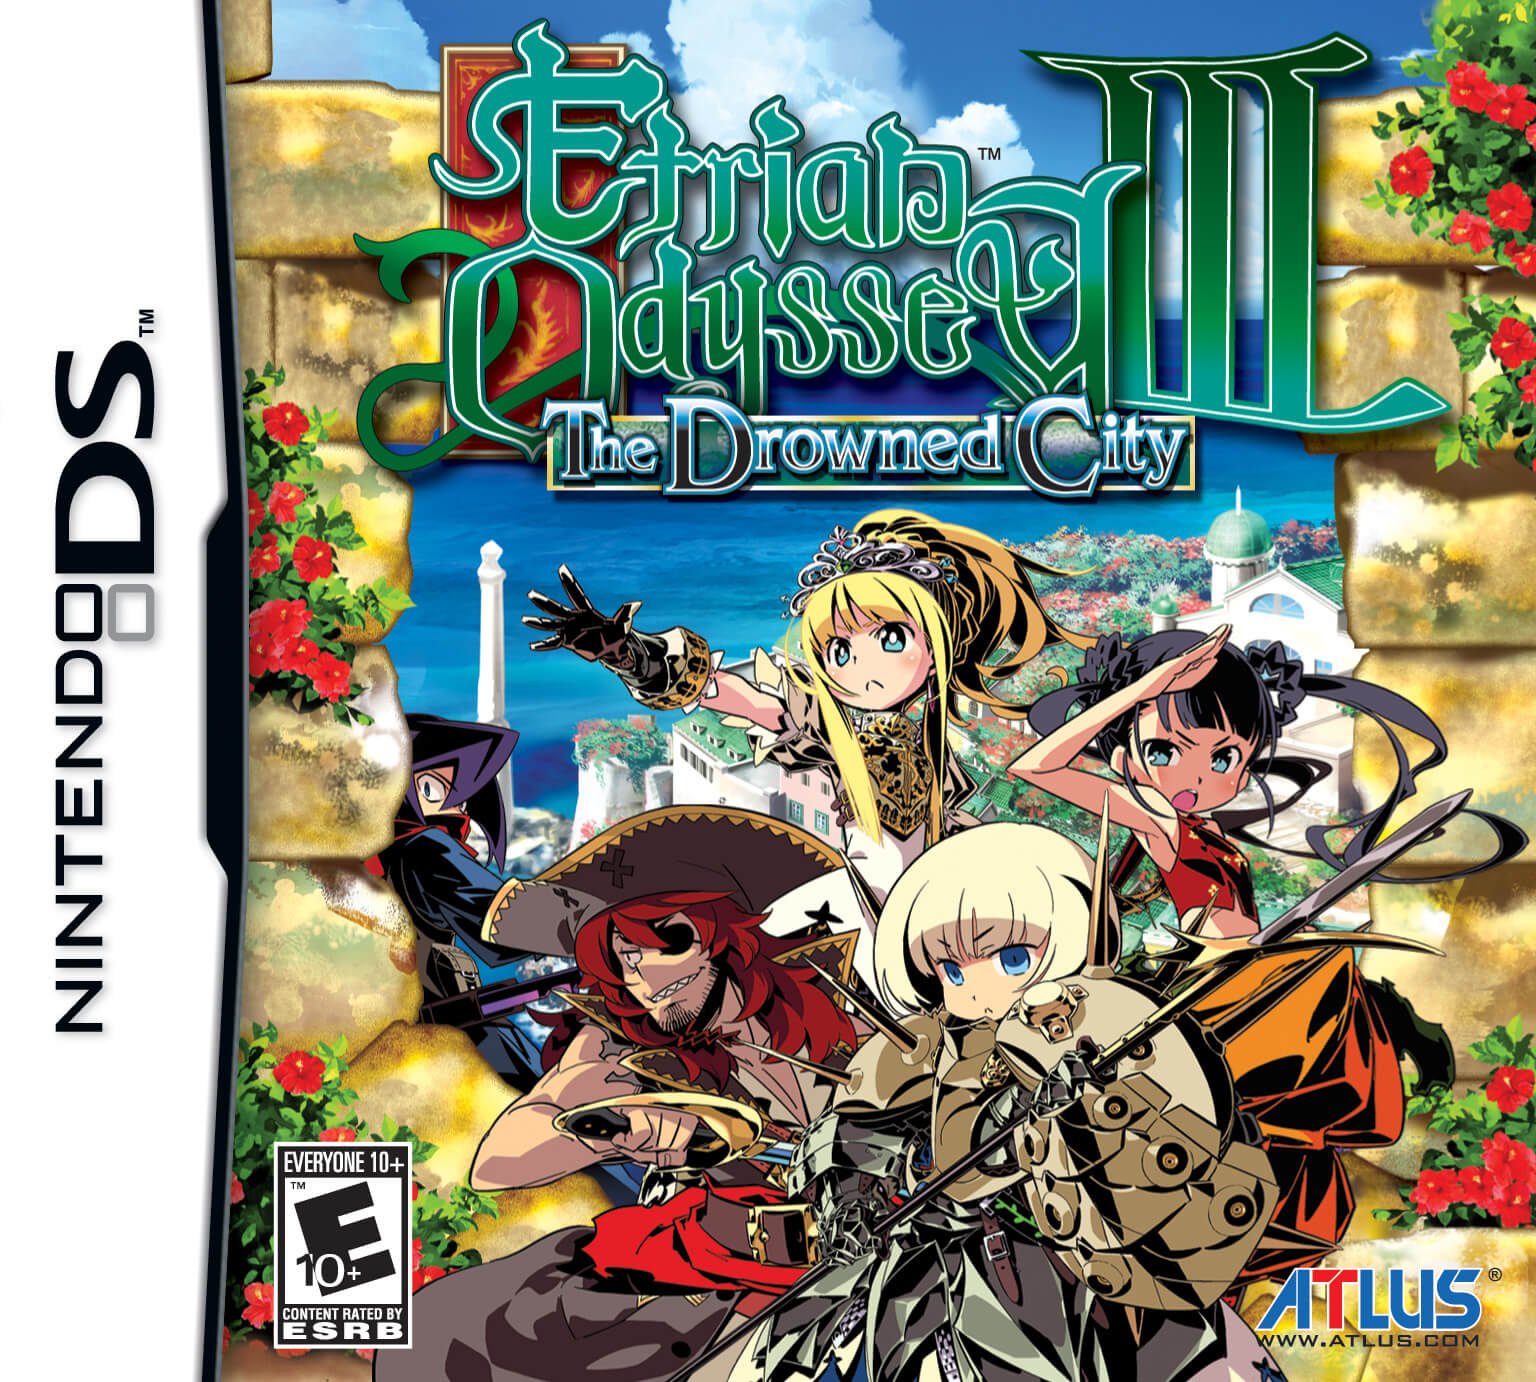 etrian-odyssey-iii-the-drowned-city-nintendods-nds-rom-download